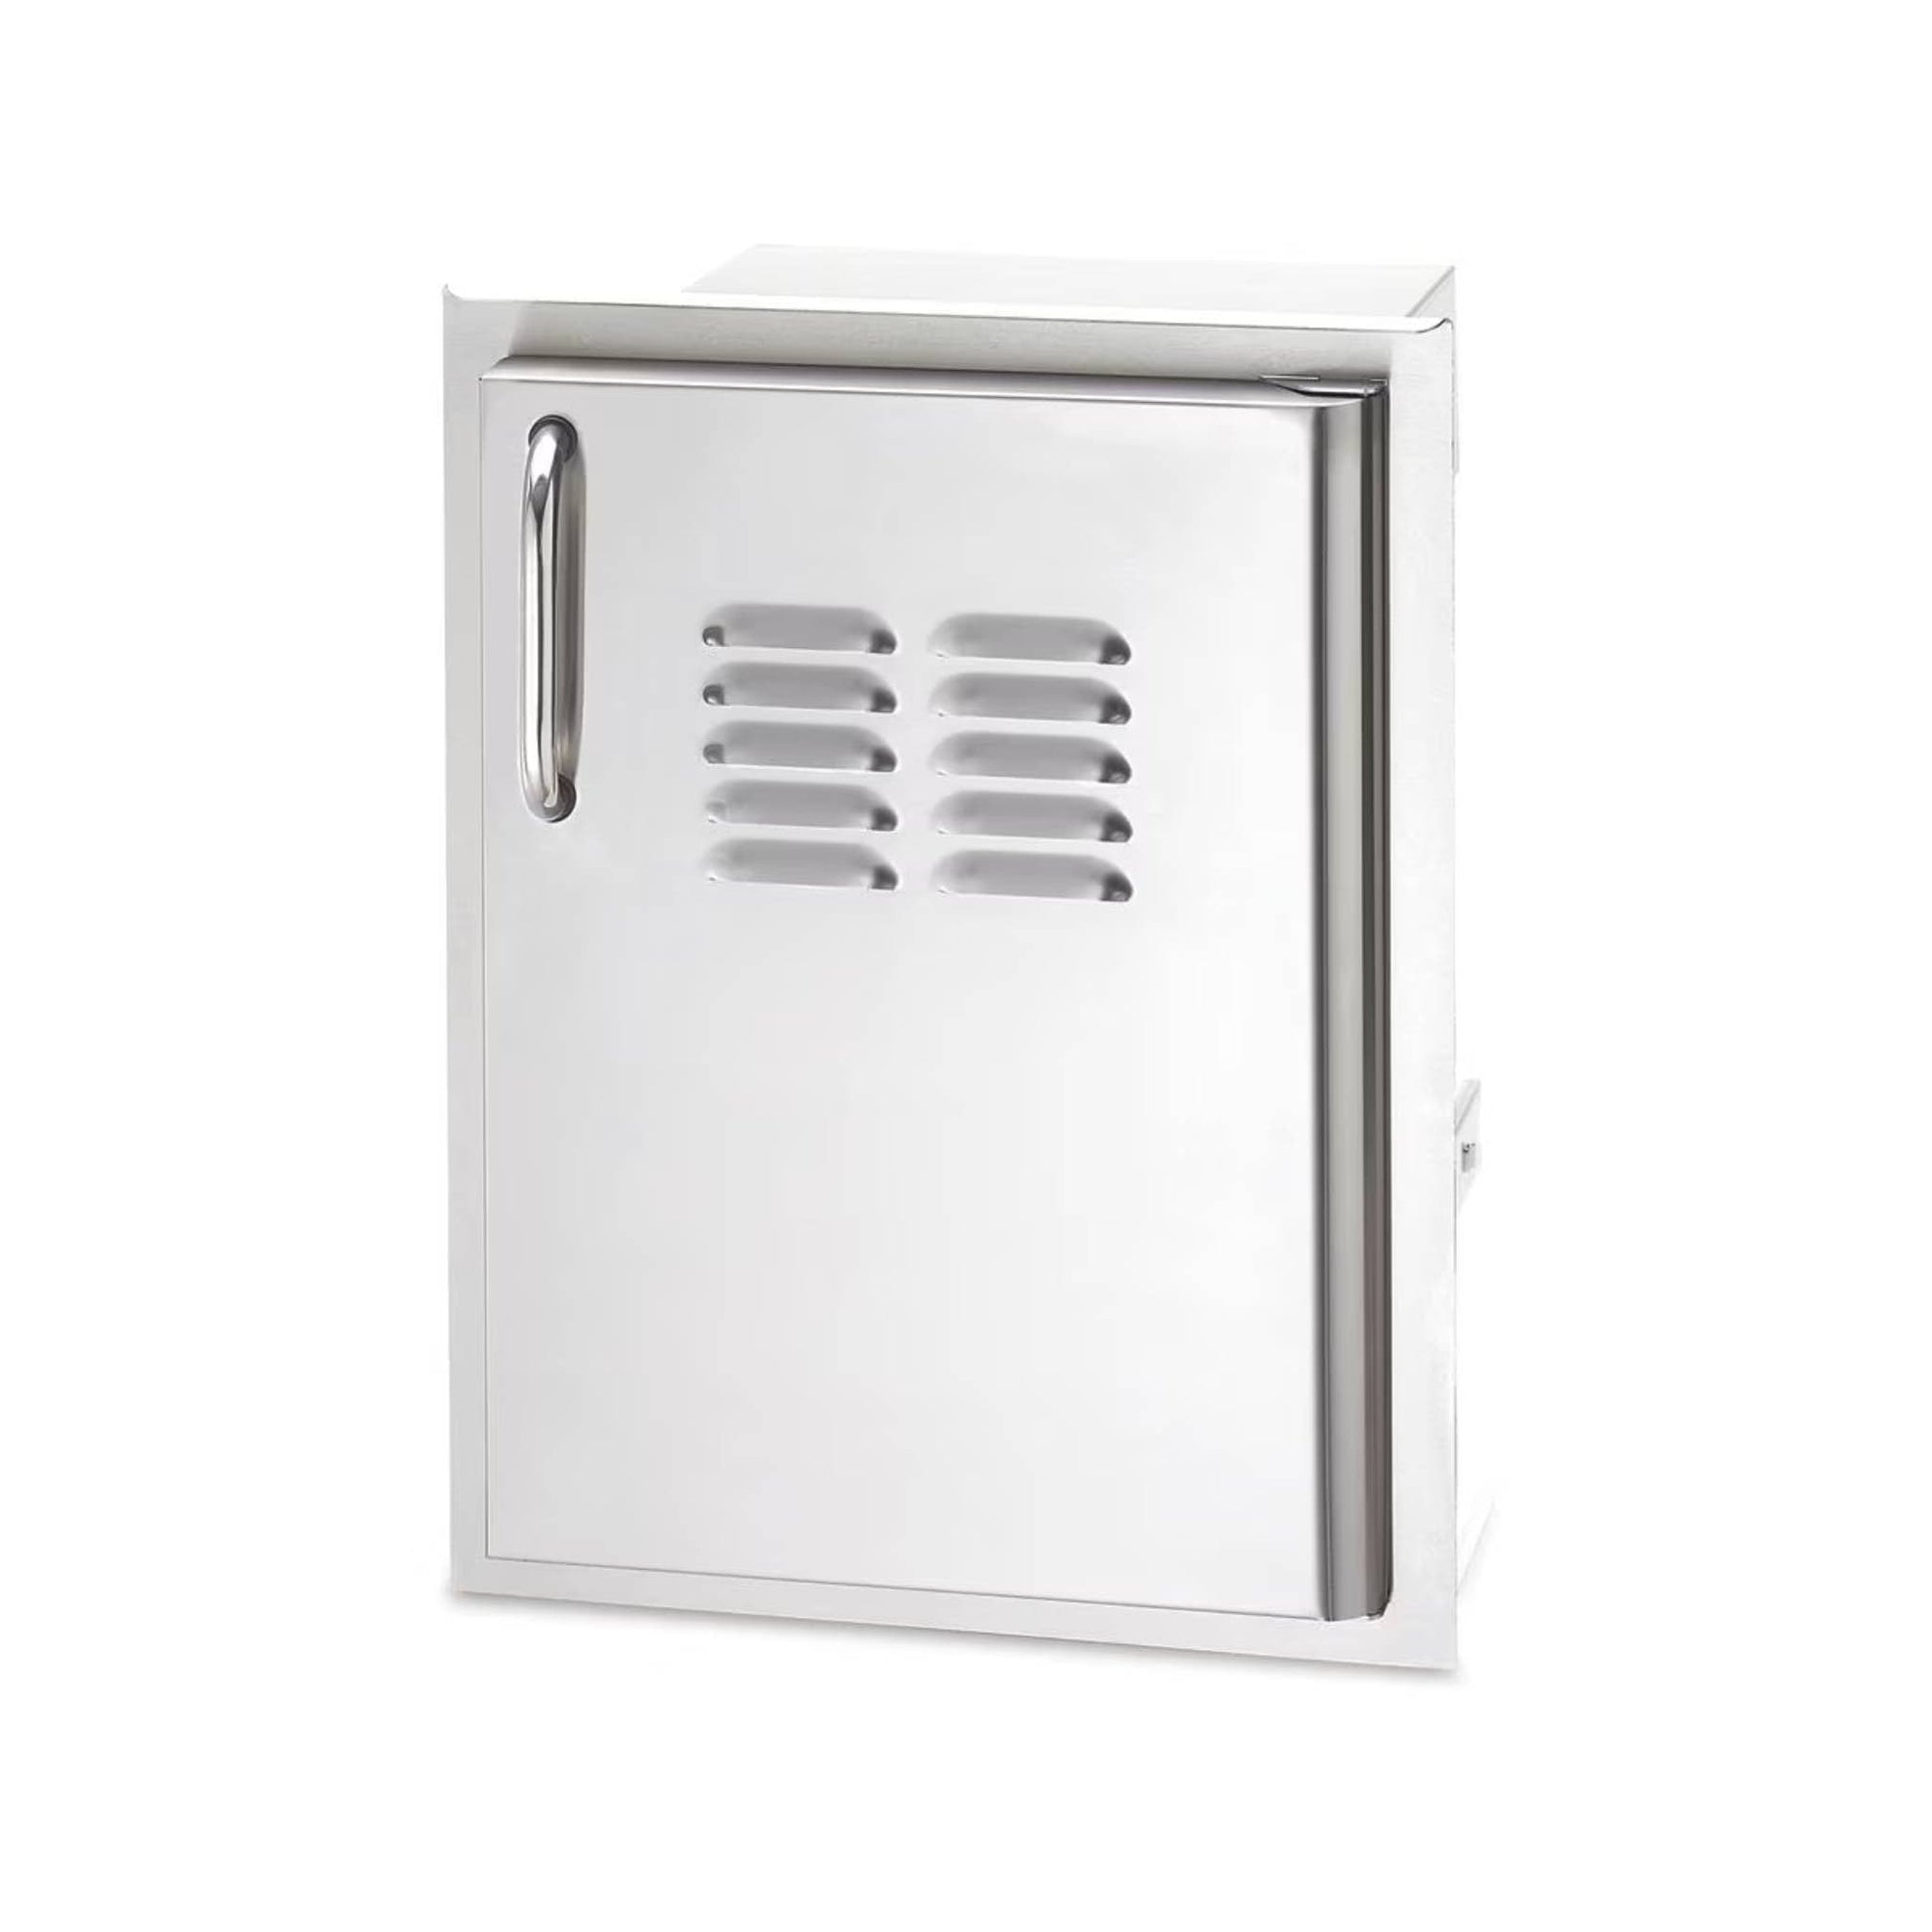 AOG 14" Single Vertical Access Door With Tank Tray & Louvers - Culinary Hardware